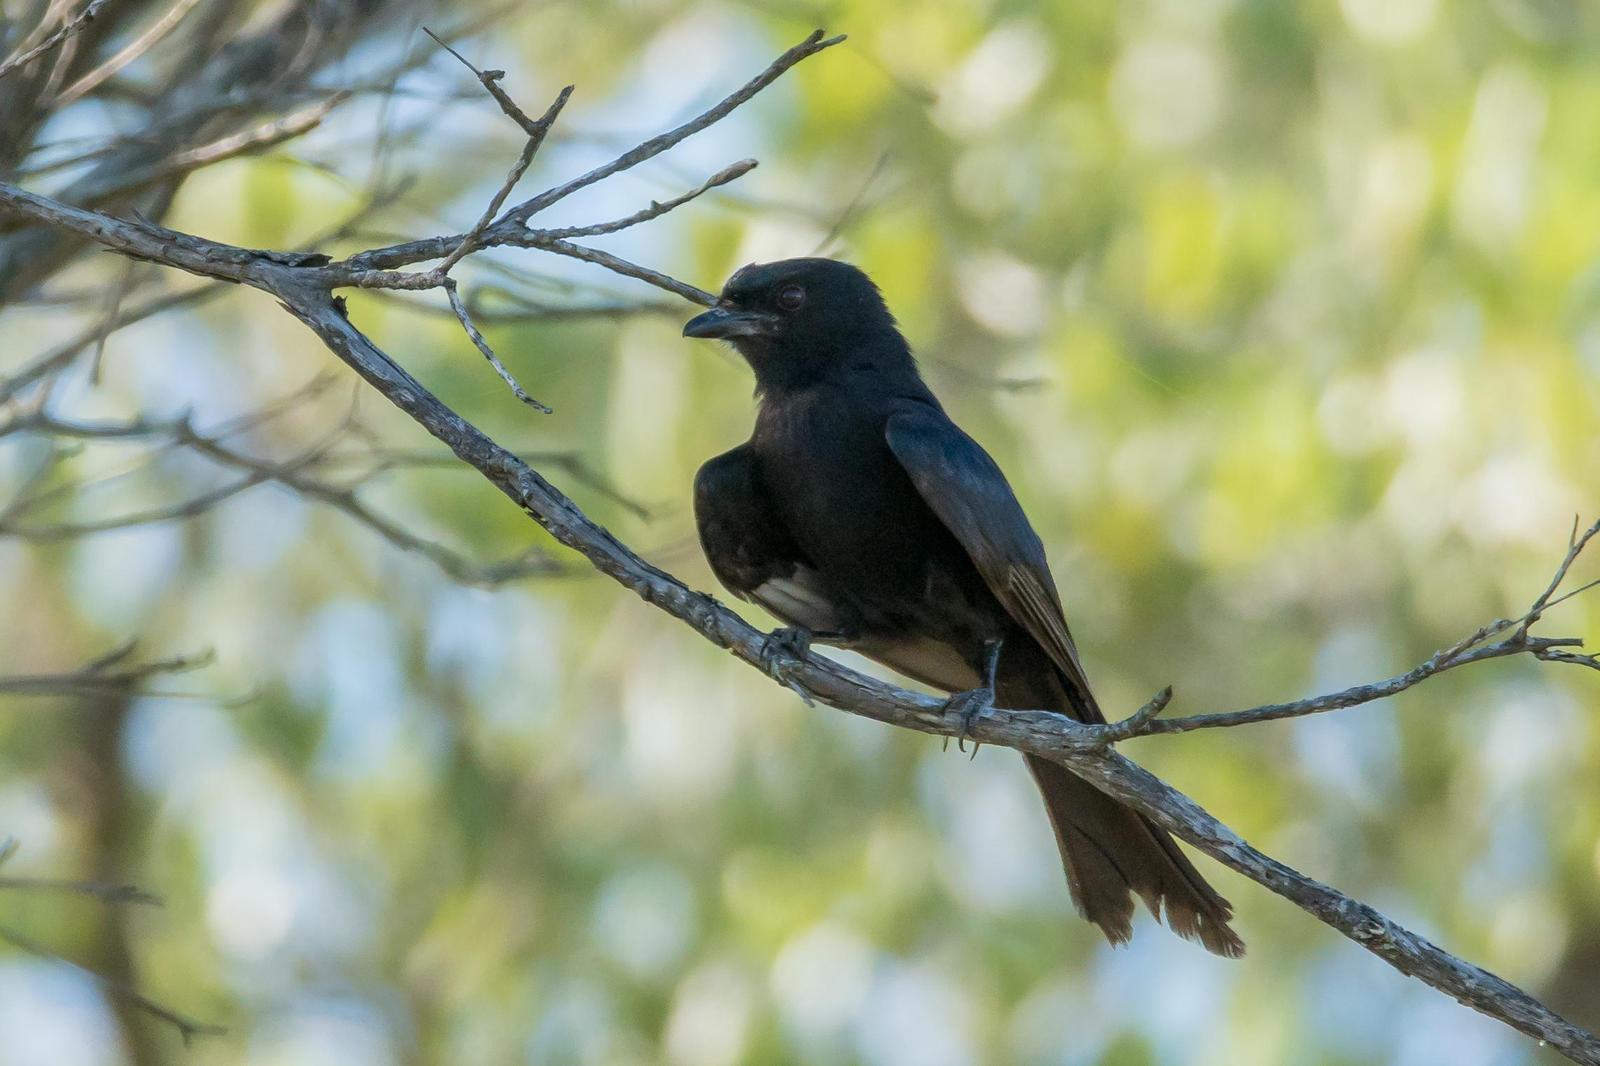 Fork-tailed/Glossy-backed Drongo Photo by Gerald Hoekstra